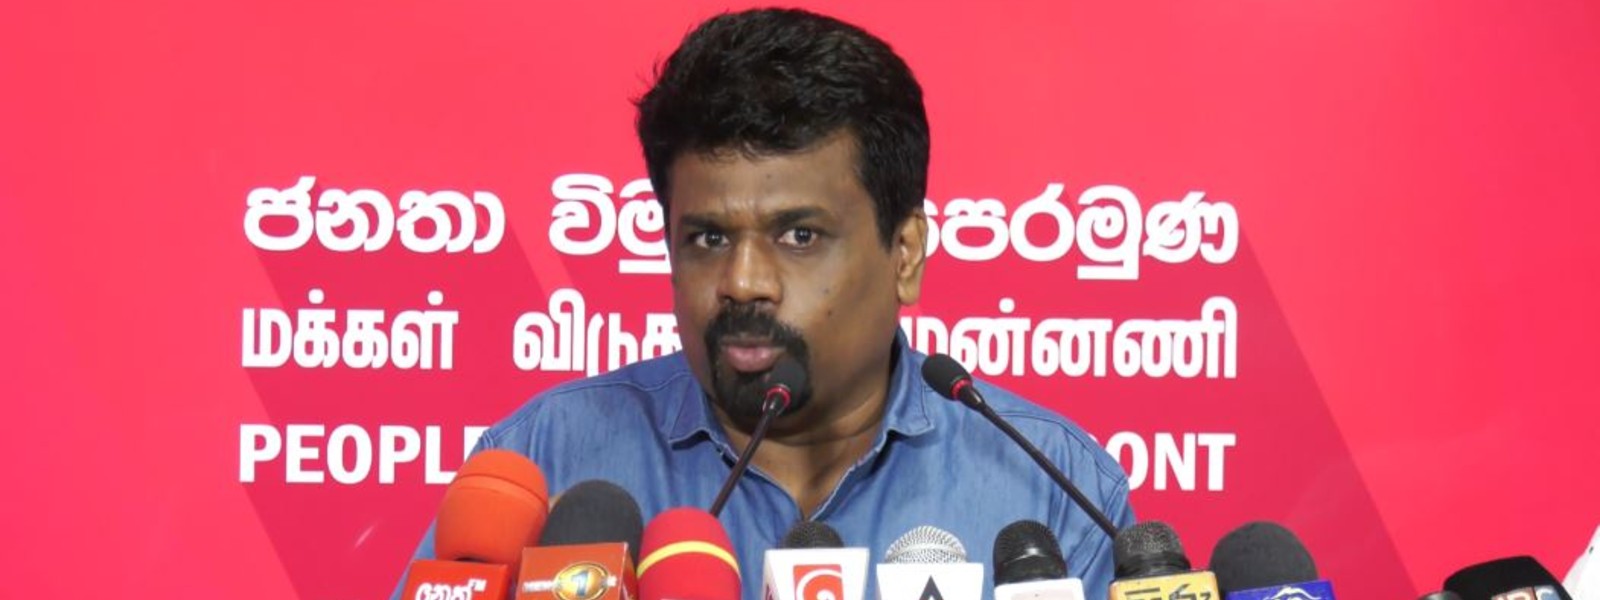 Appoint PSC to decide on X-Press Pearl, proposes Anura